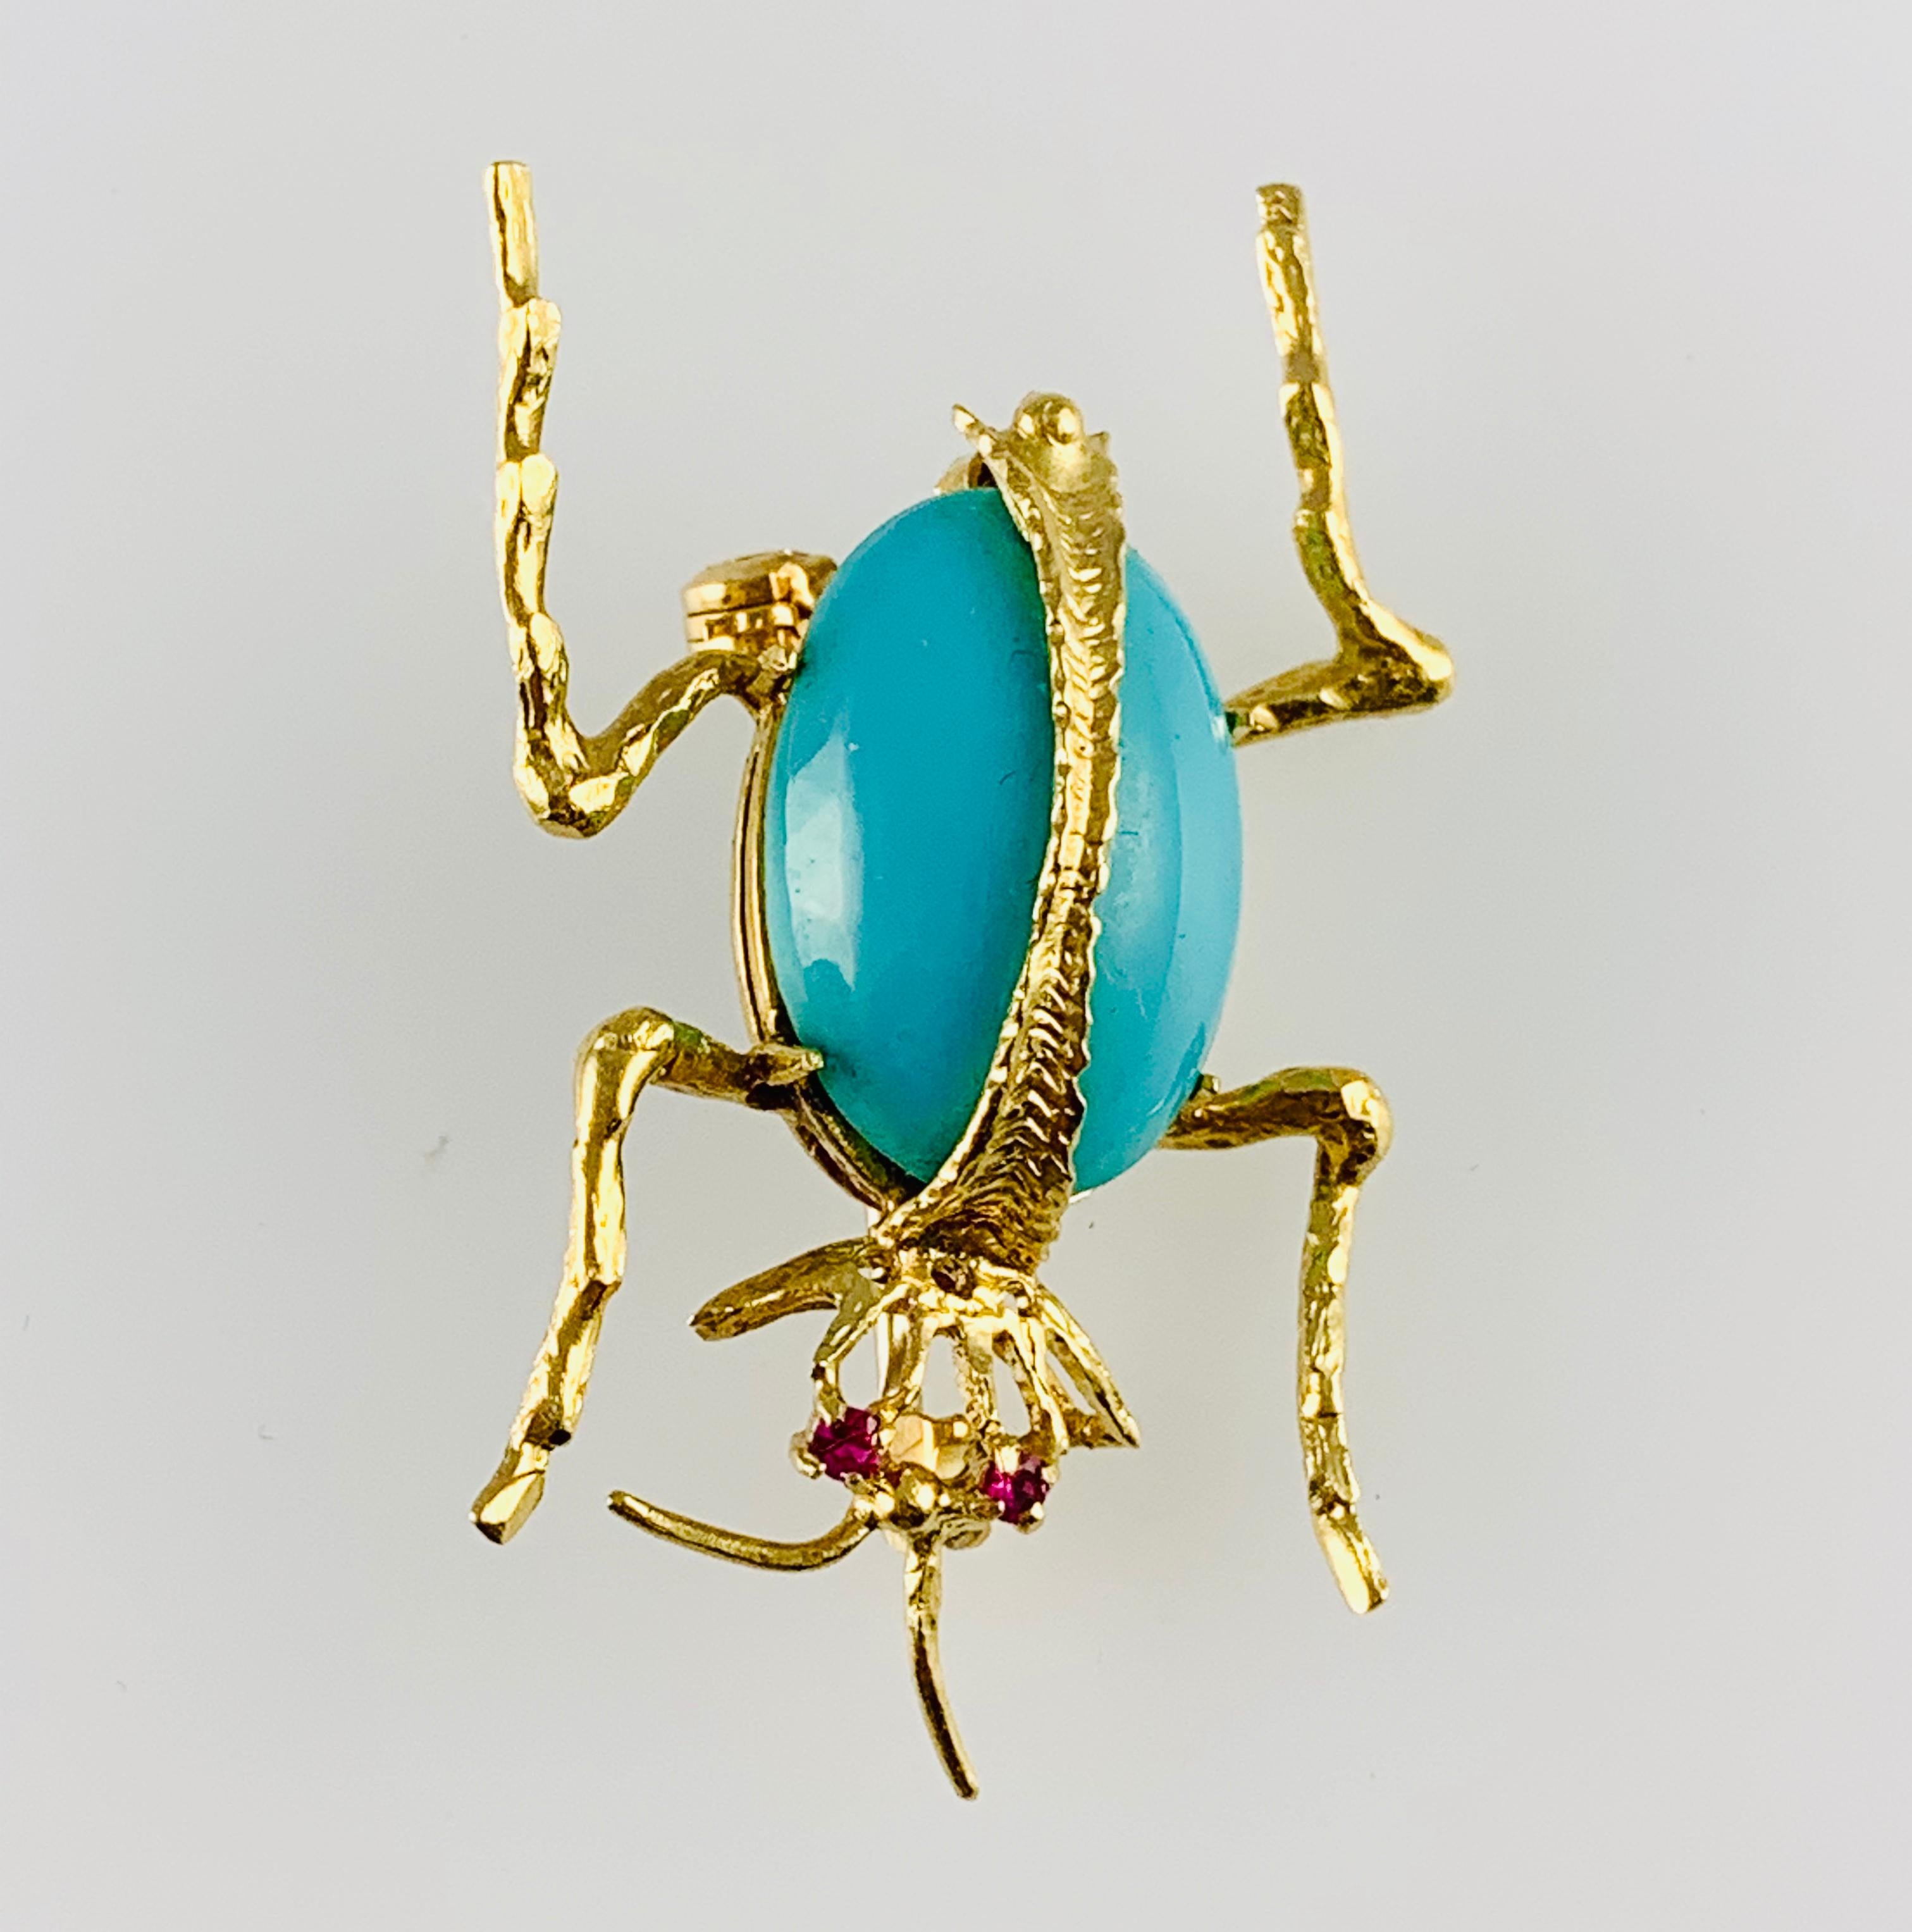 Gorgeous Vintage Beetle Brooch! Made in 18K yellow Gold it features an 18 by 13 mm Oval    
Turquoise stone as the body with two Ruby eyes. It  measures 1.5 inches by 1 inch and weighs 7.5 grams.